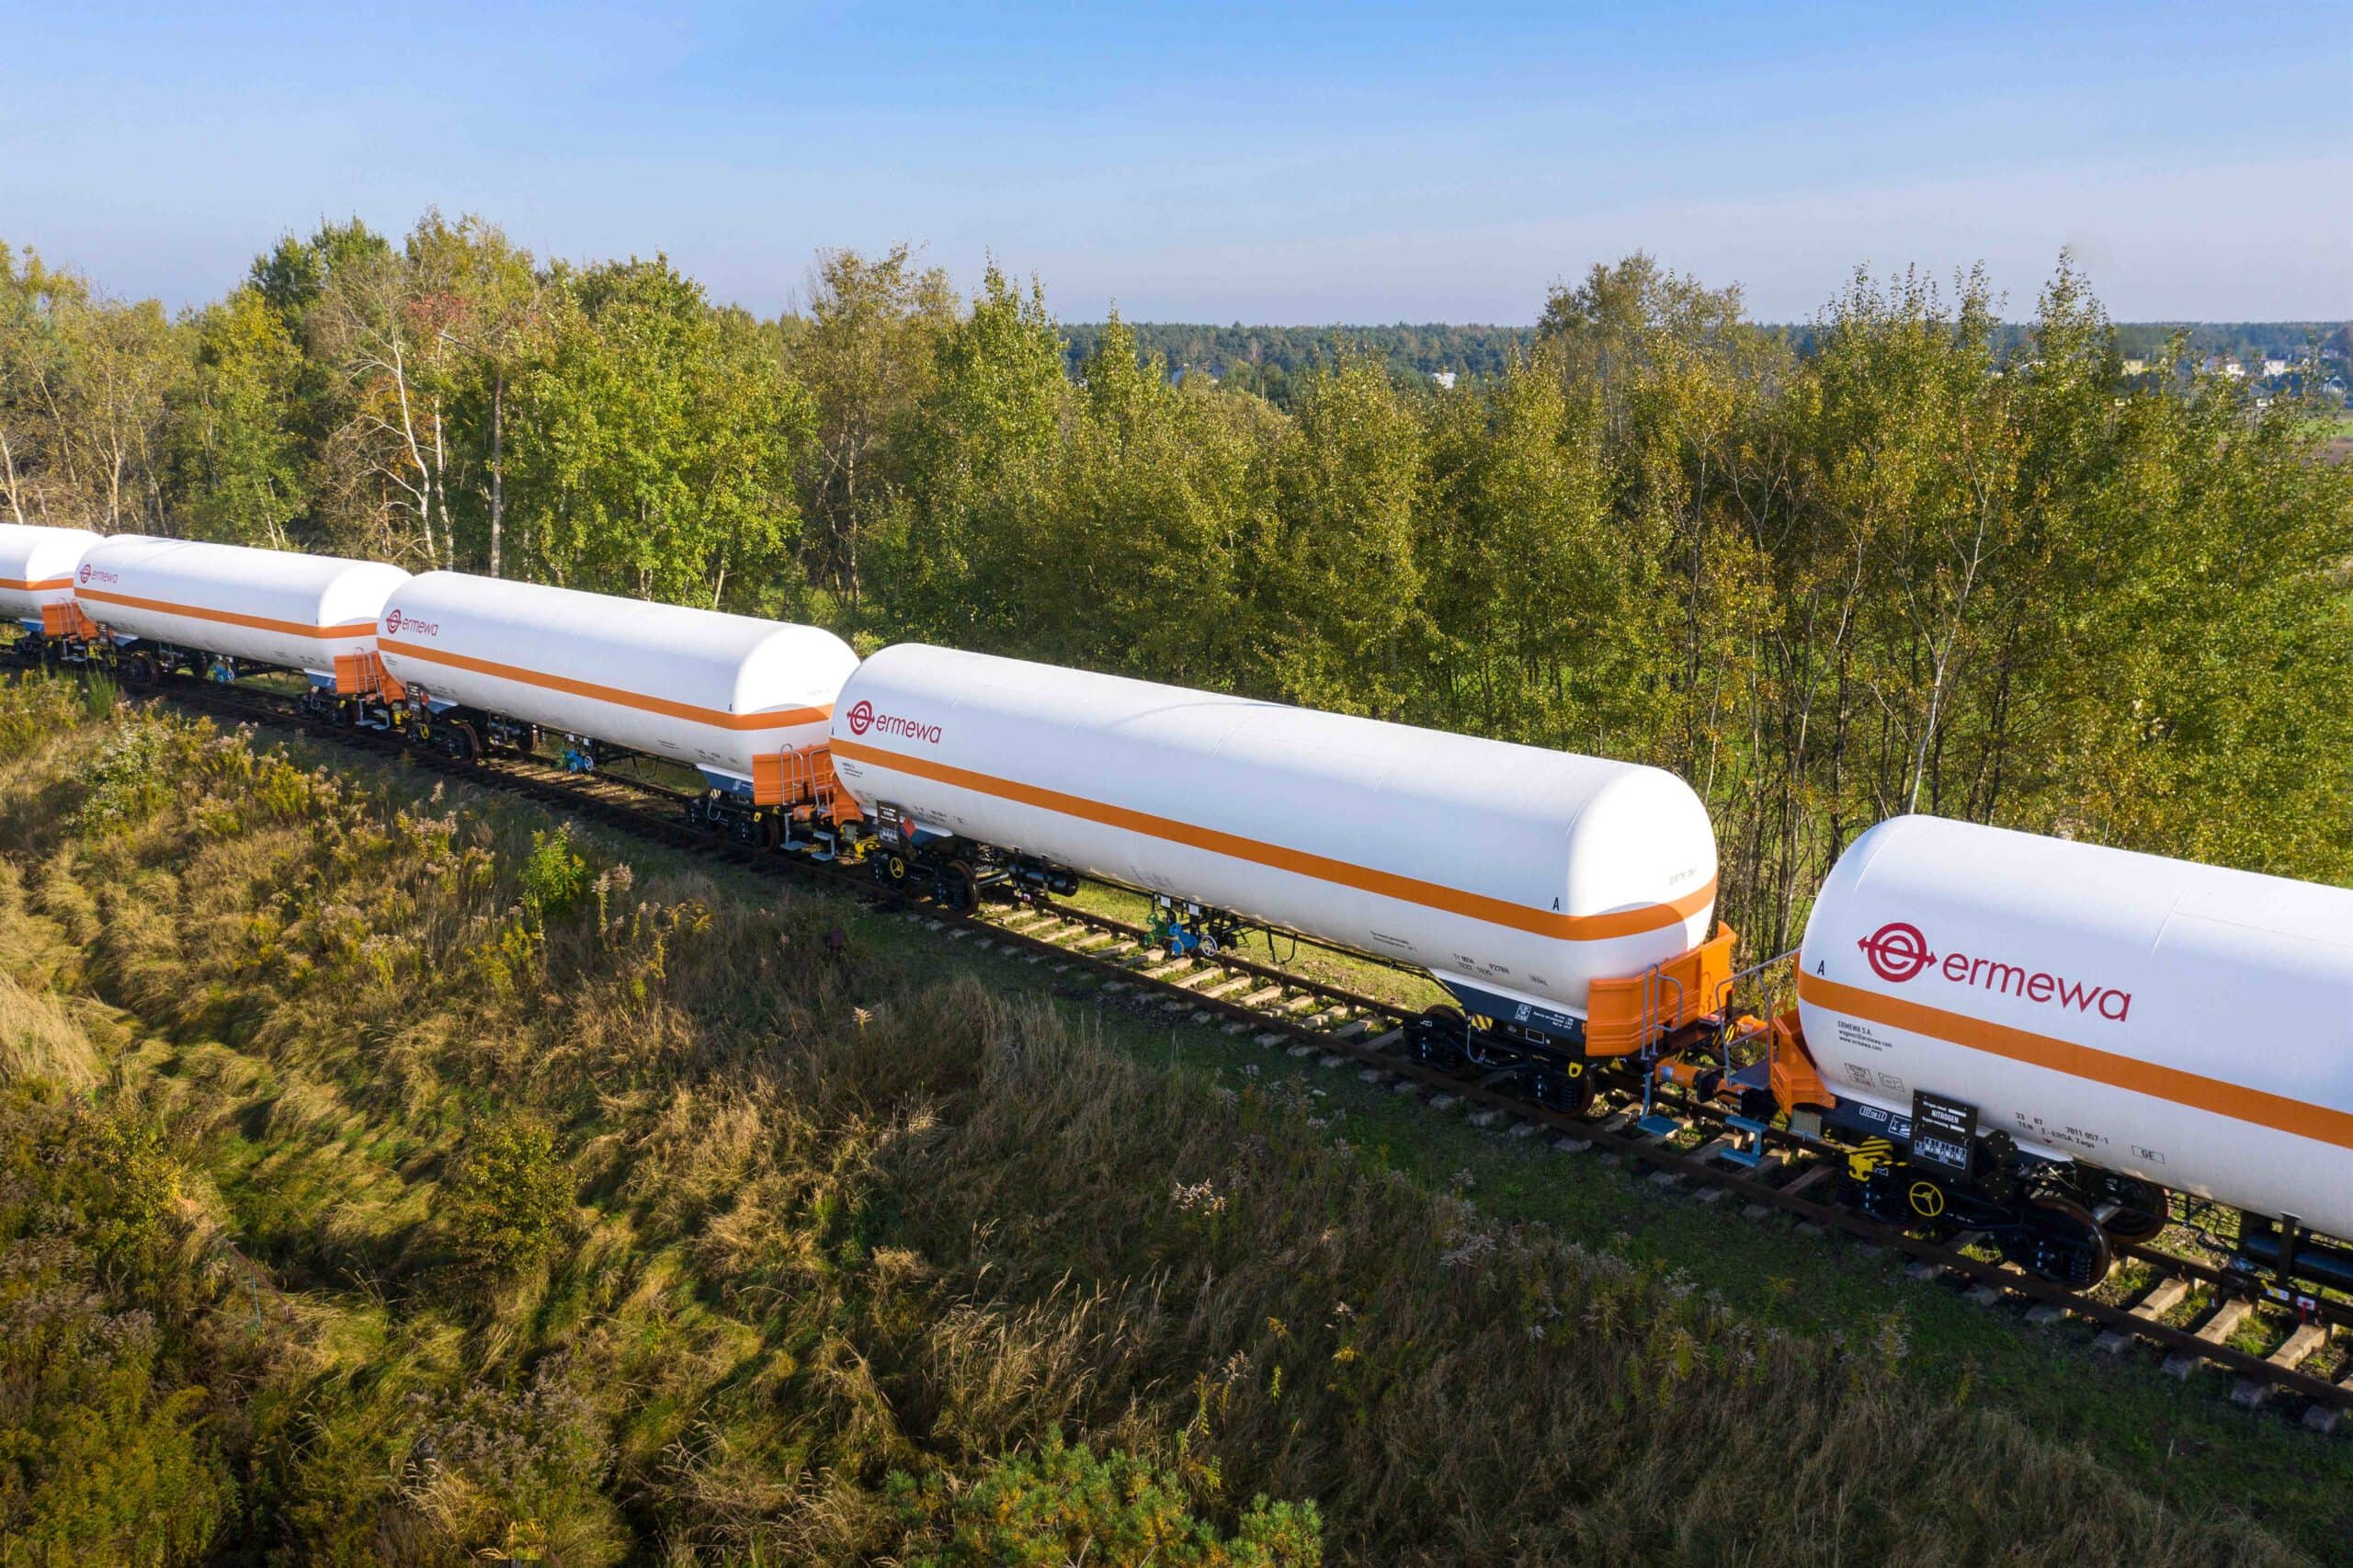 Transporting New Build Wagons Competitively – Ermewa’s Success Story